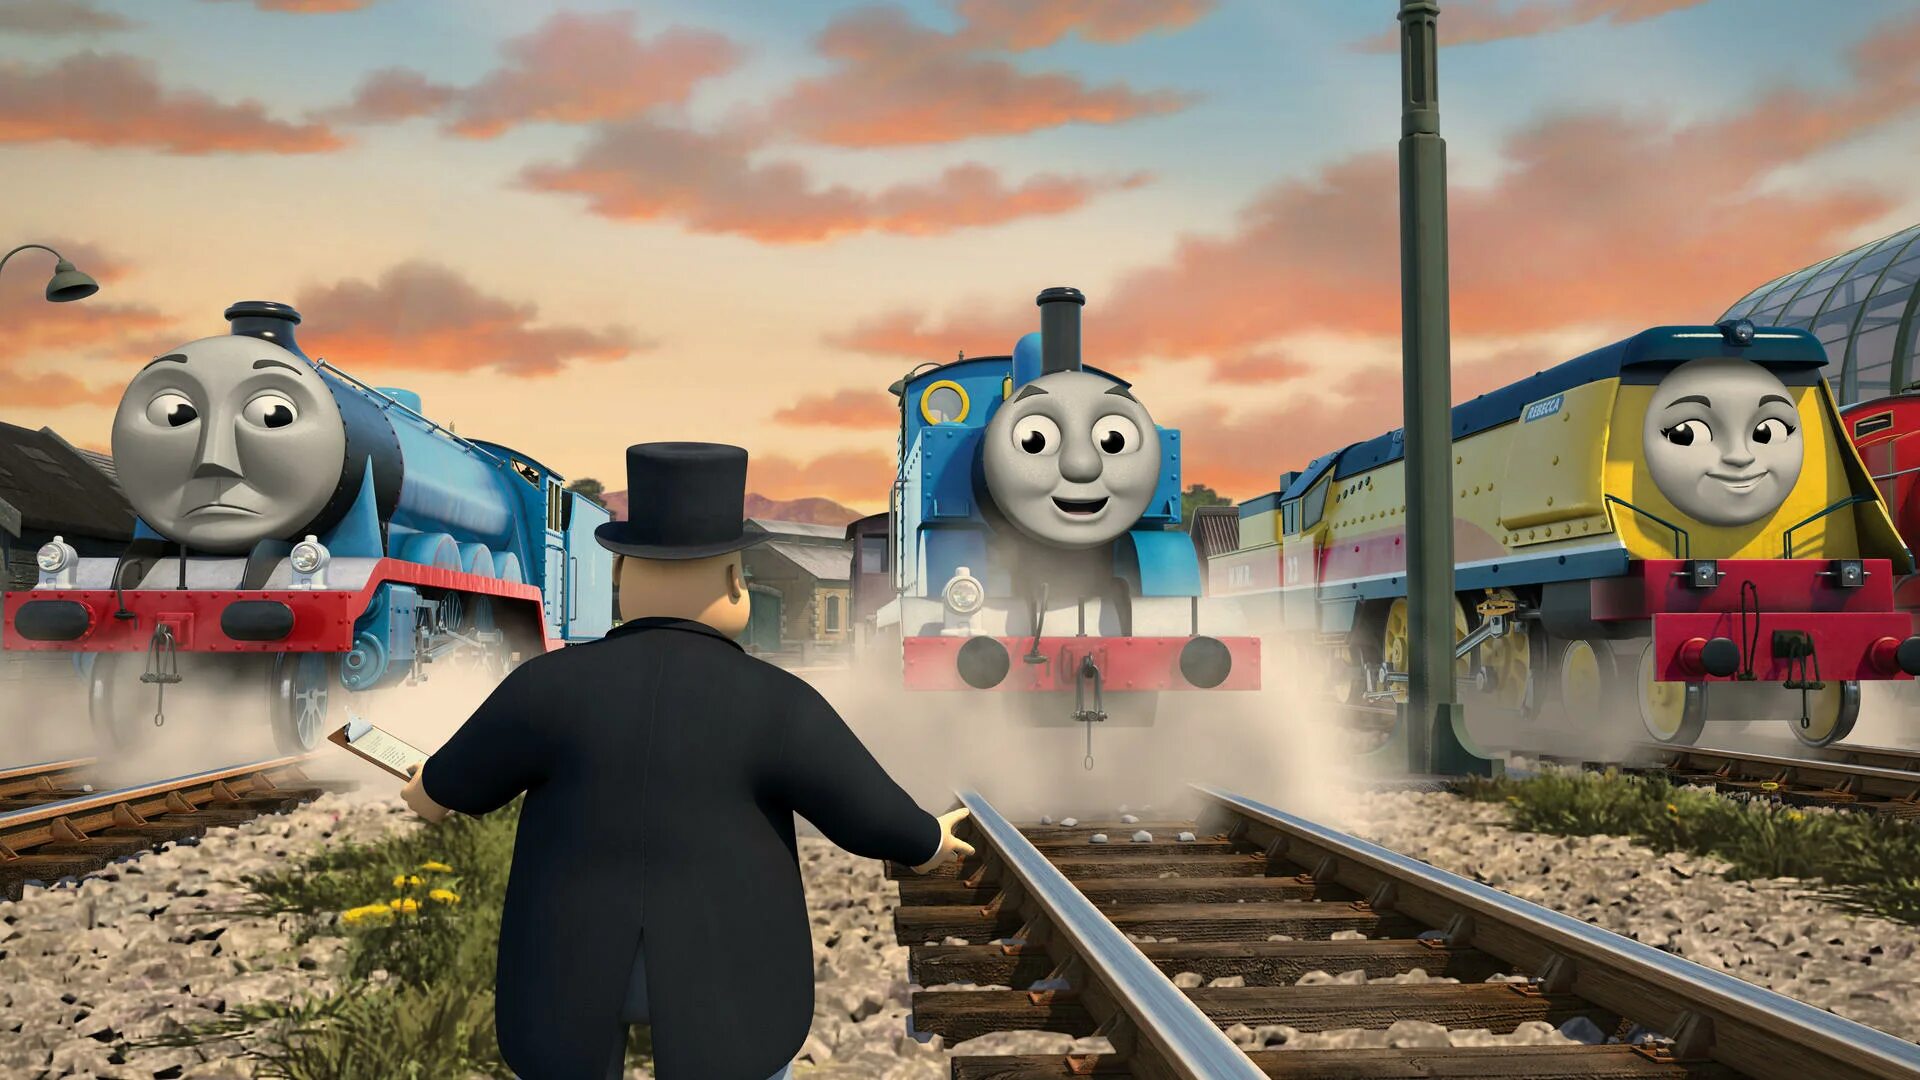 We that he the train. Thomas and friends Thomas.